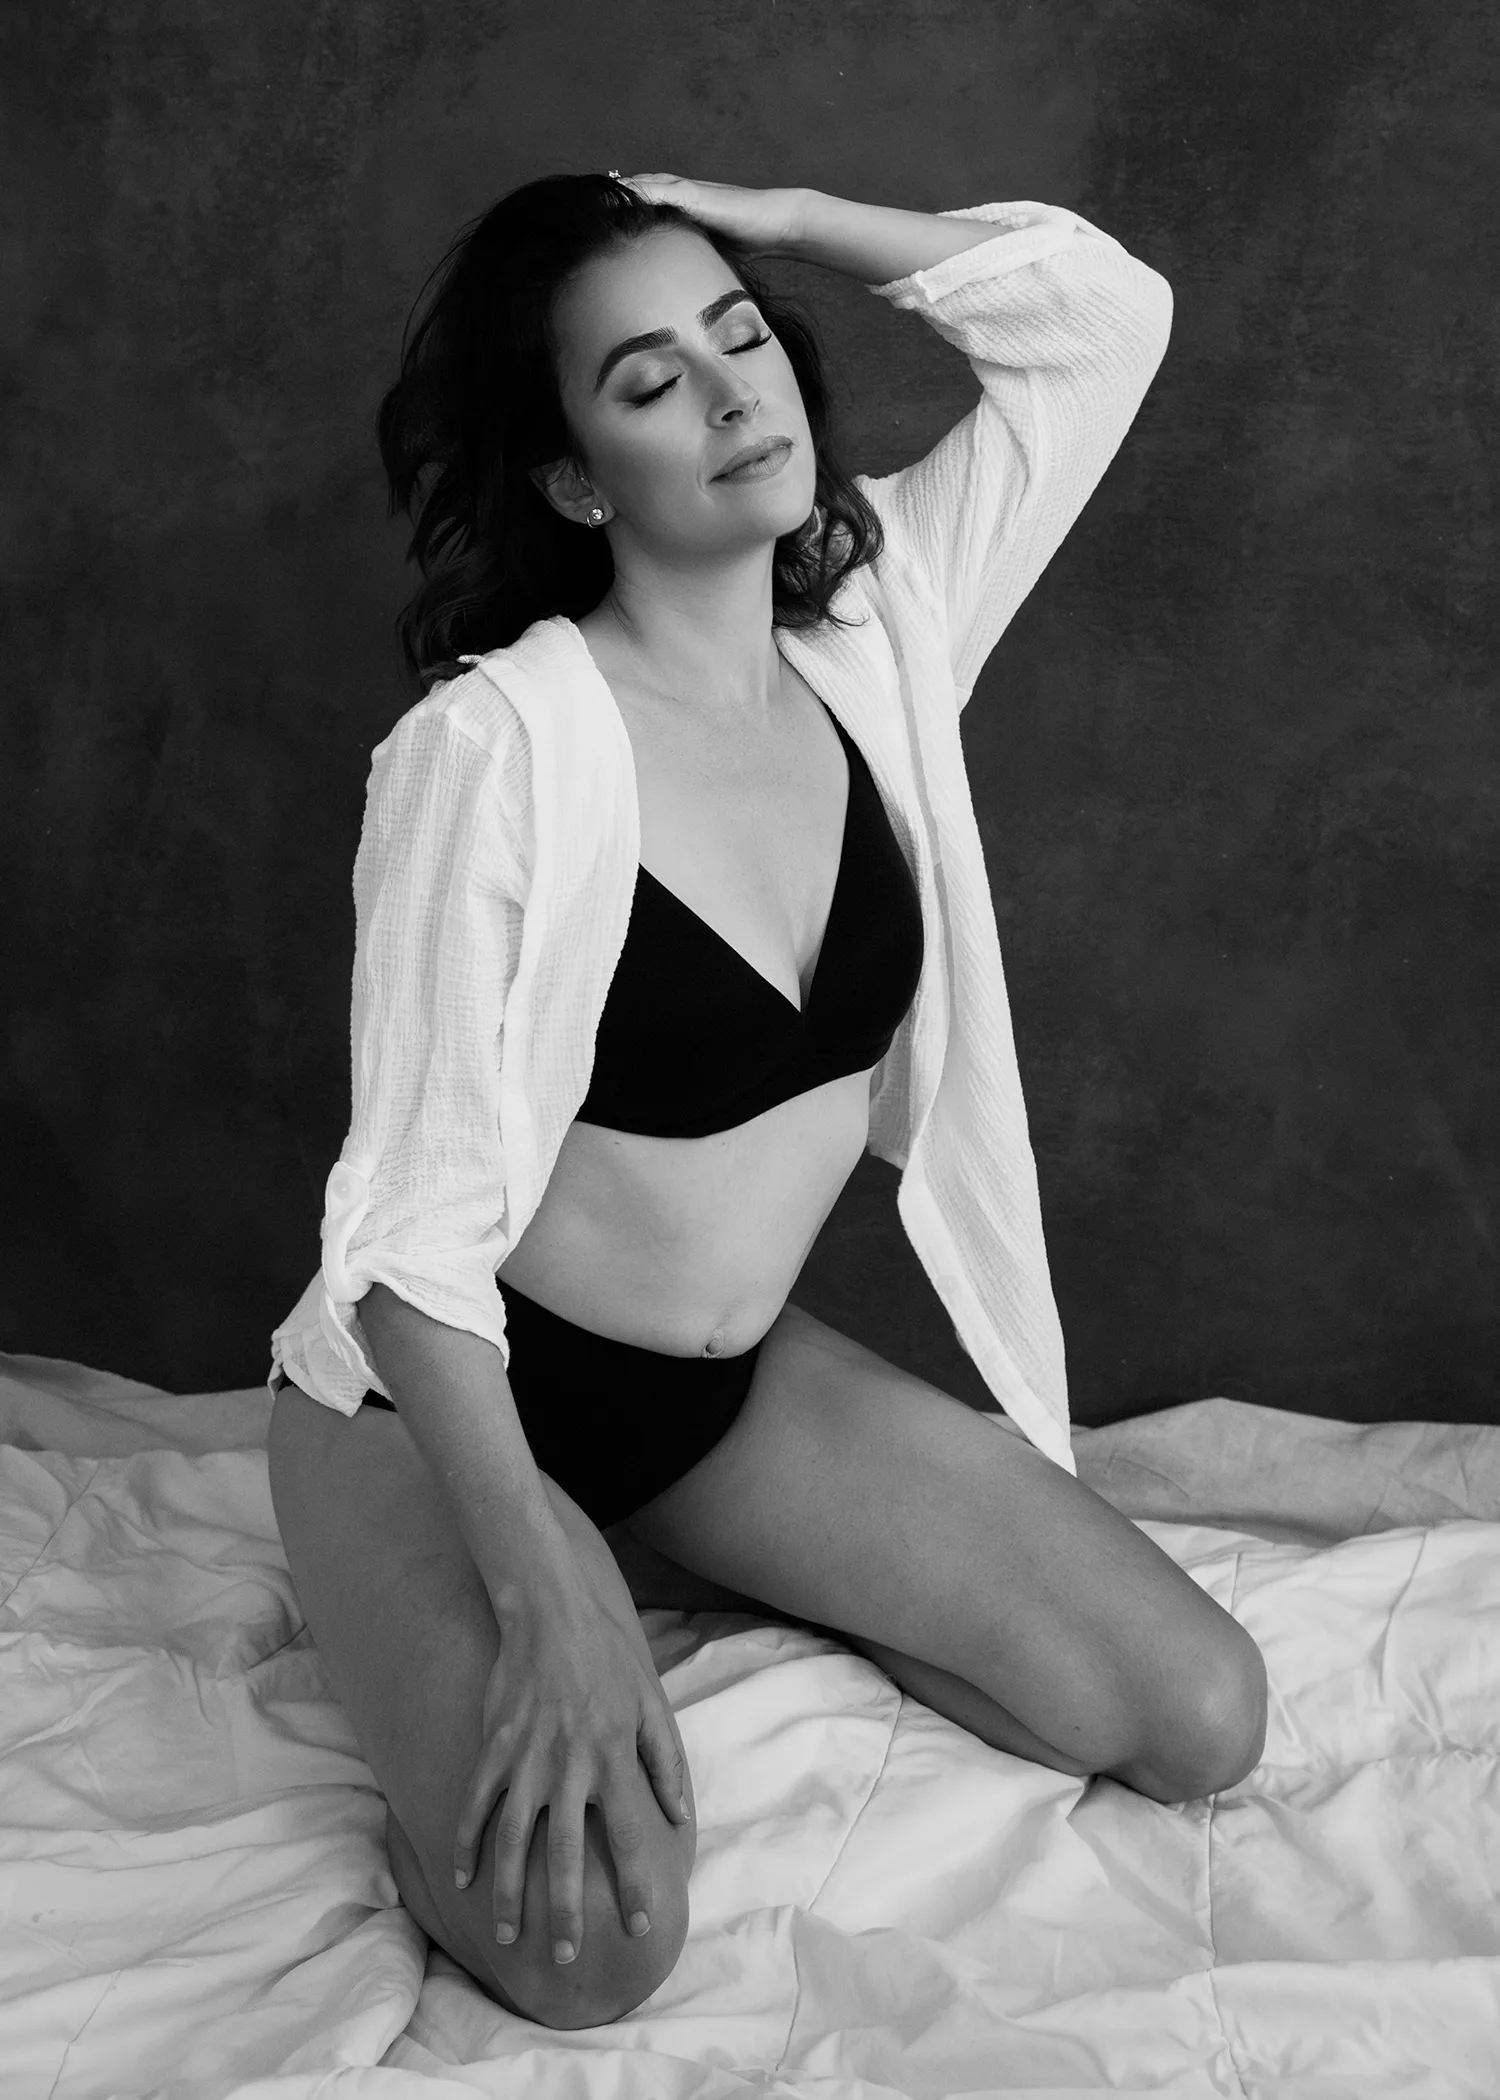 black and white boudoir and empowerment portrait of a woman wearing high waisted shorts and an oversized sweatshirt. Casual Boudoir photography by Andrea Liora Studios in San Francisco, CA.